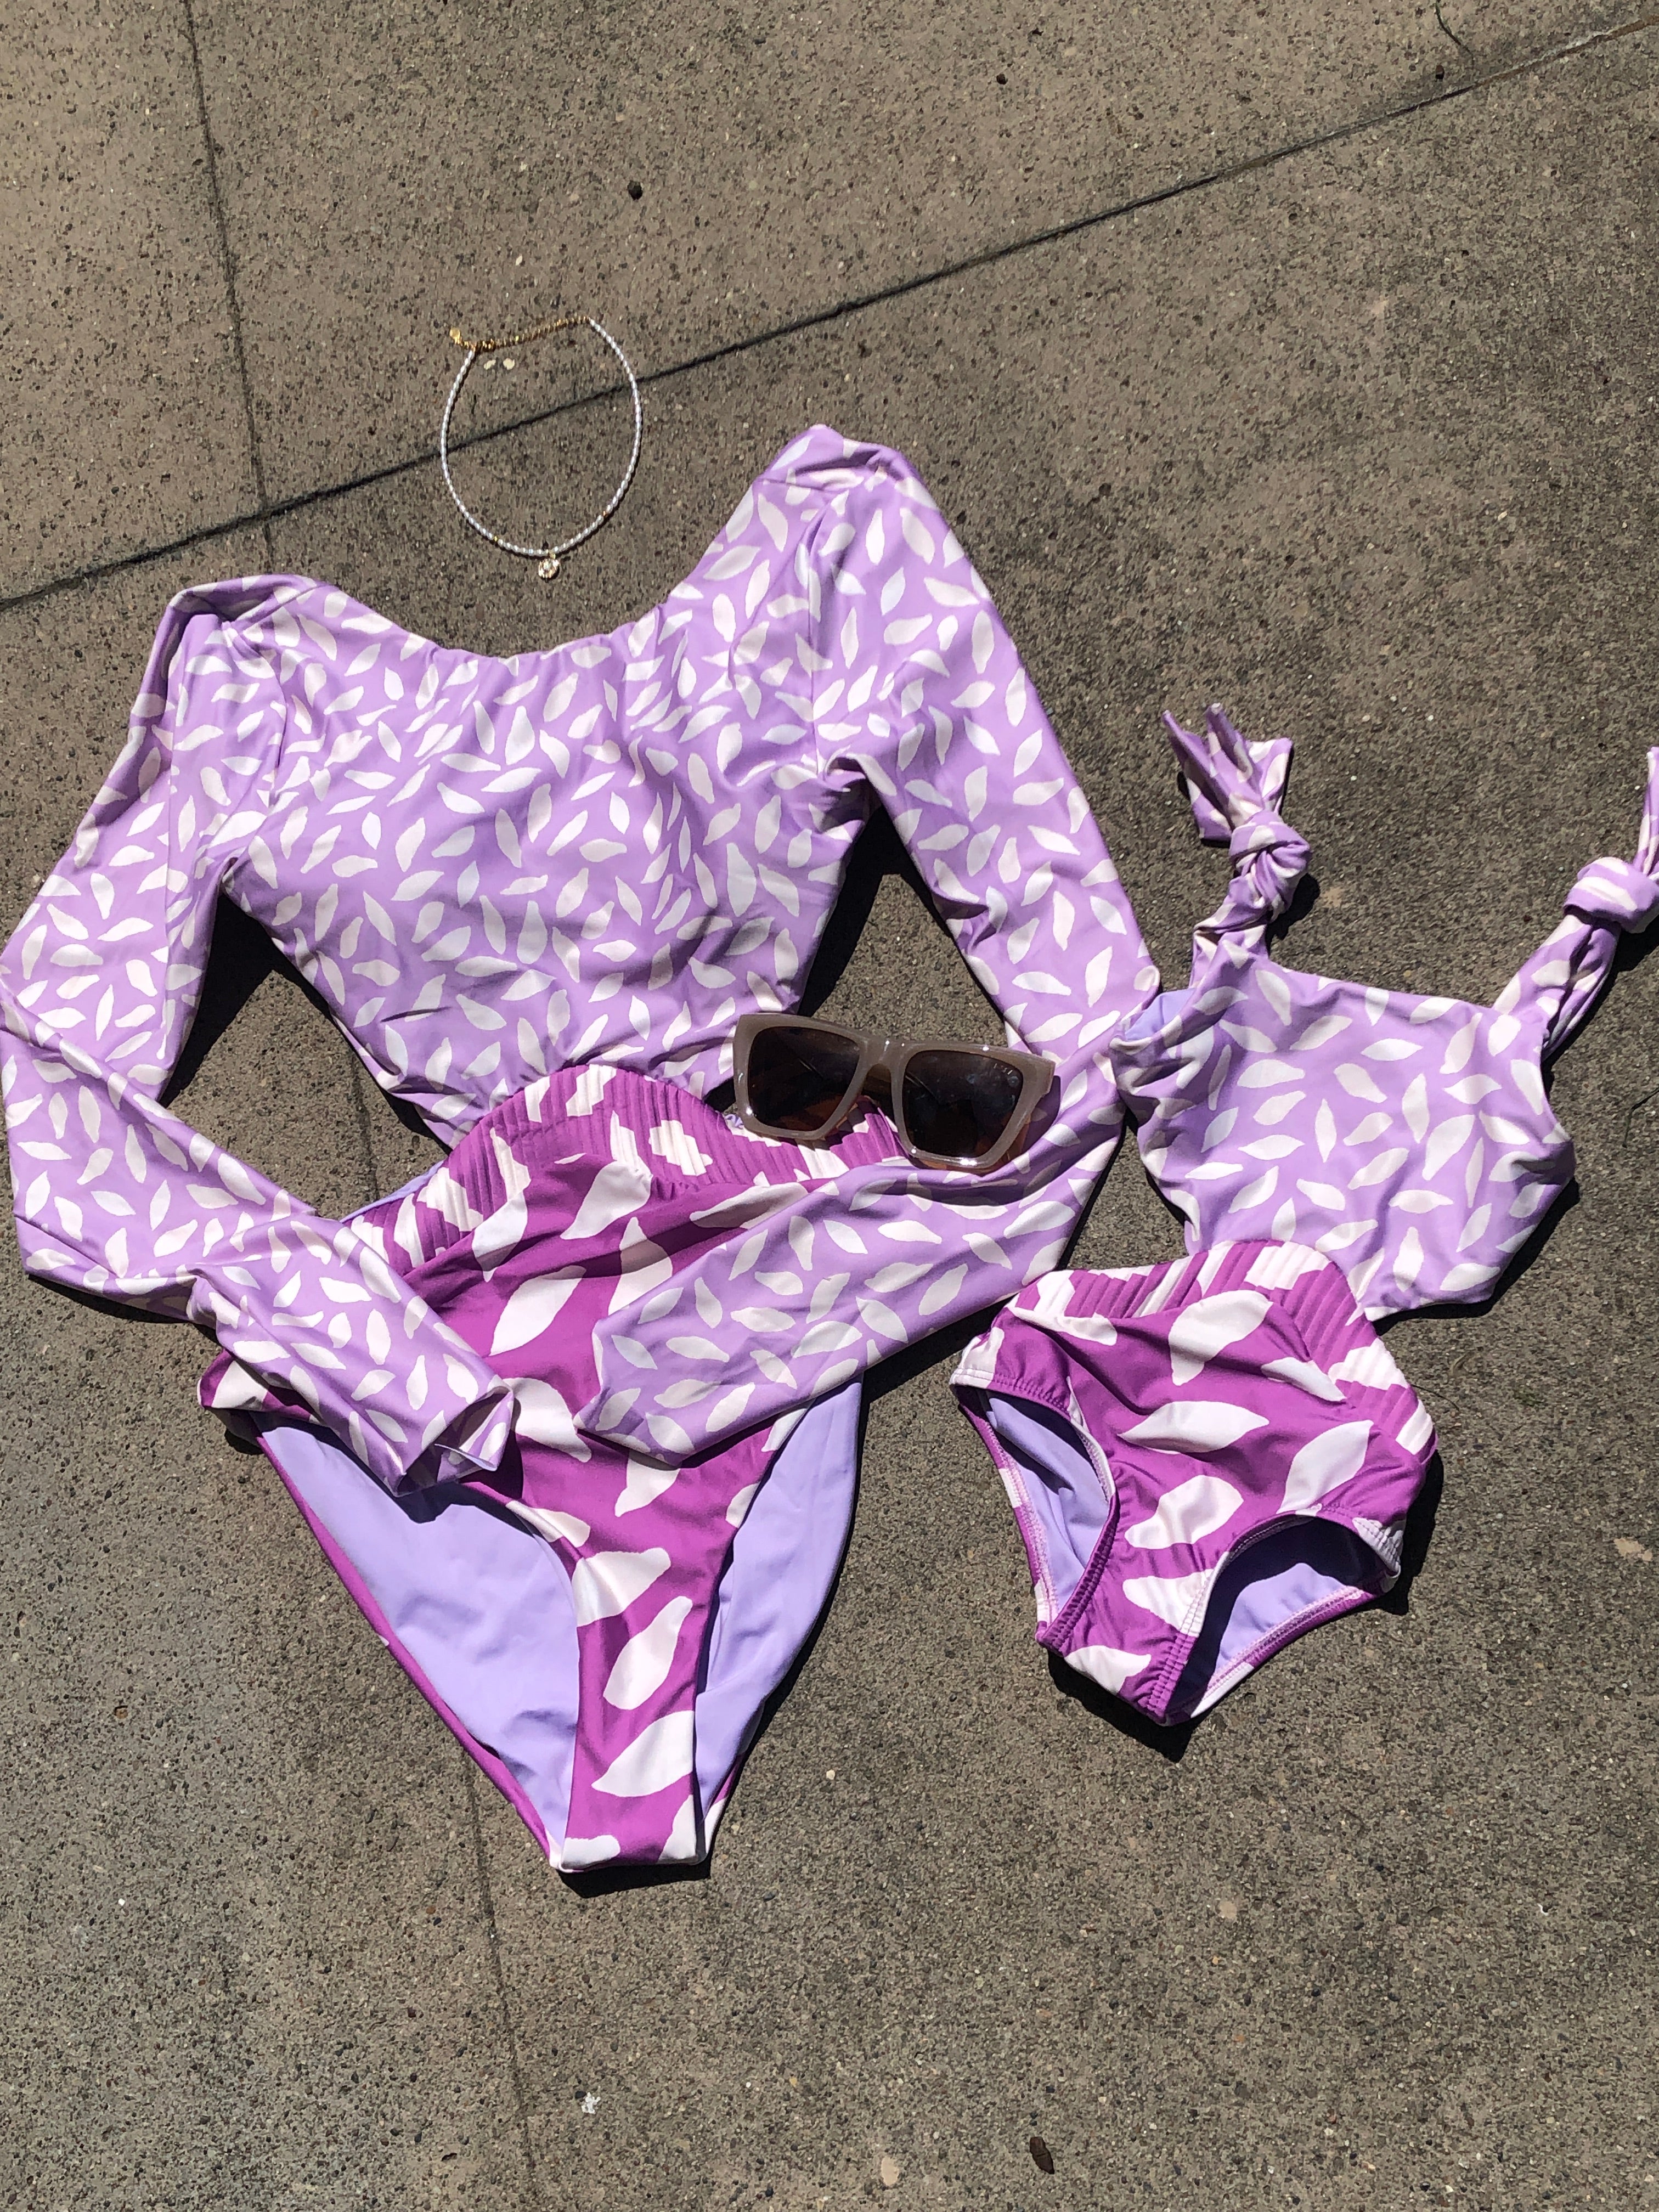 matching mom and daughter monokini purple swimsuits with white leaf pattern